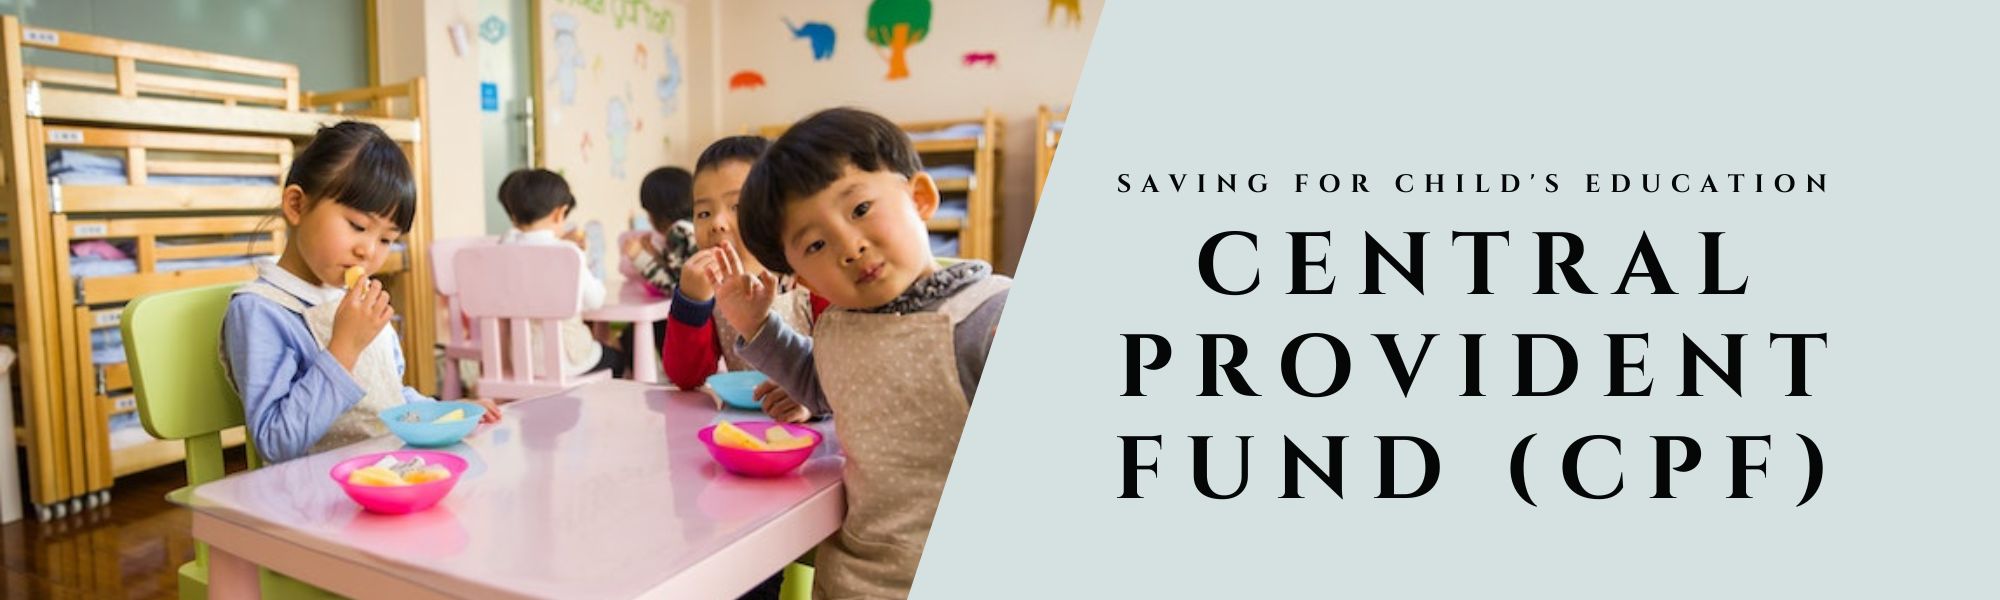 Saving for Child's Education_CPF